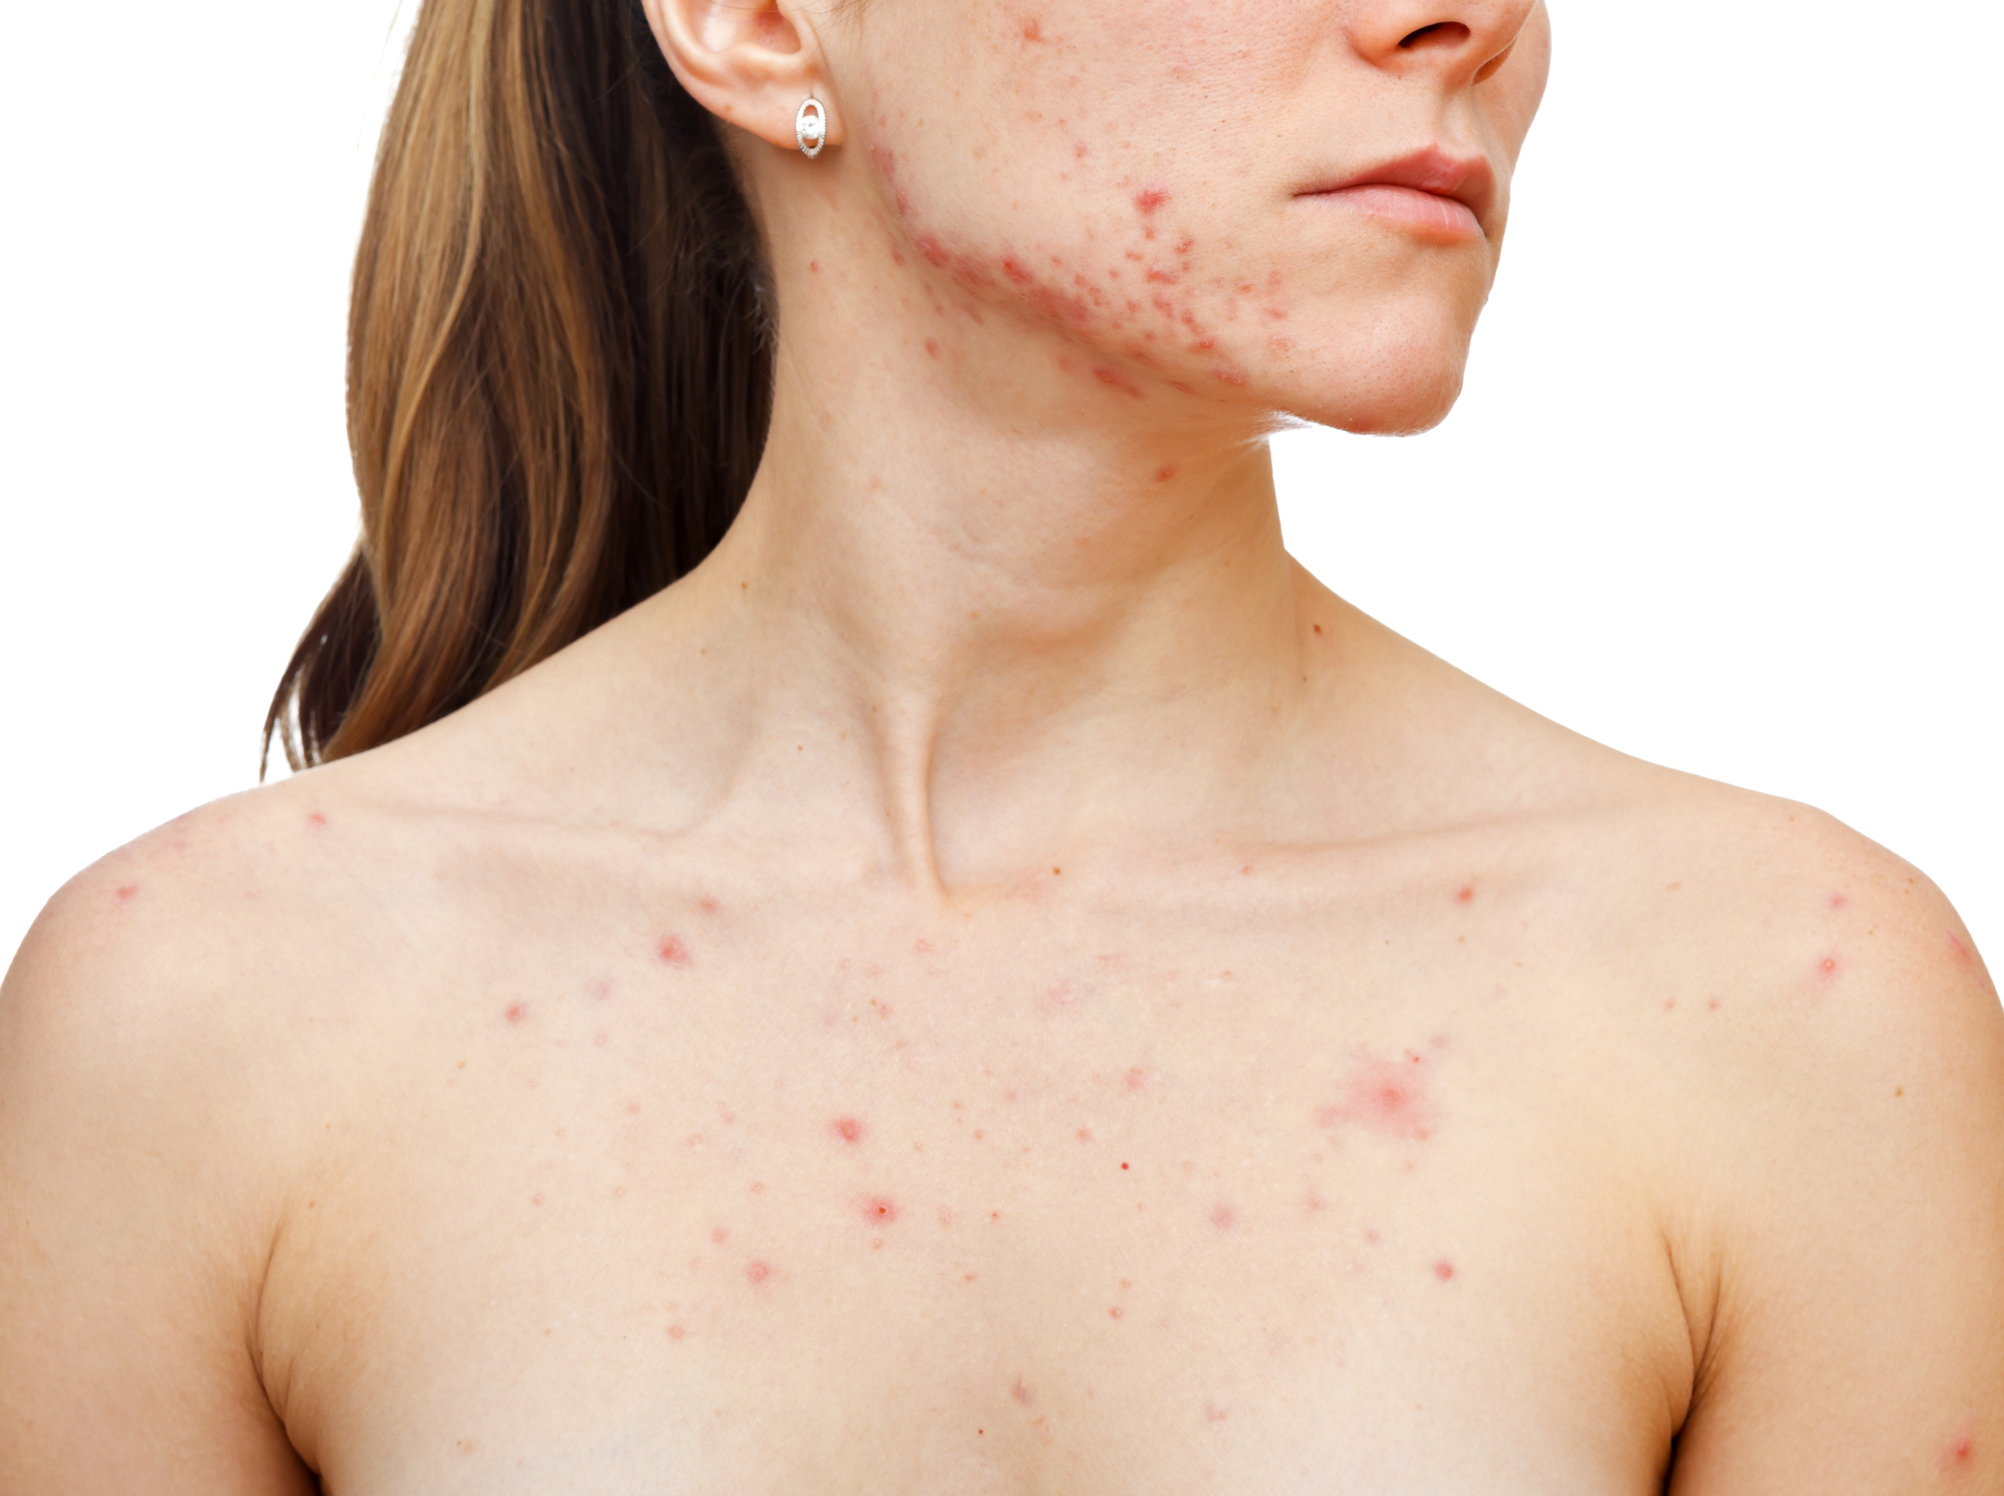 Acne on the face and chest of a woman.